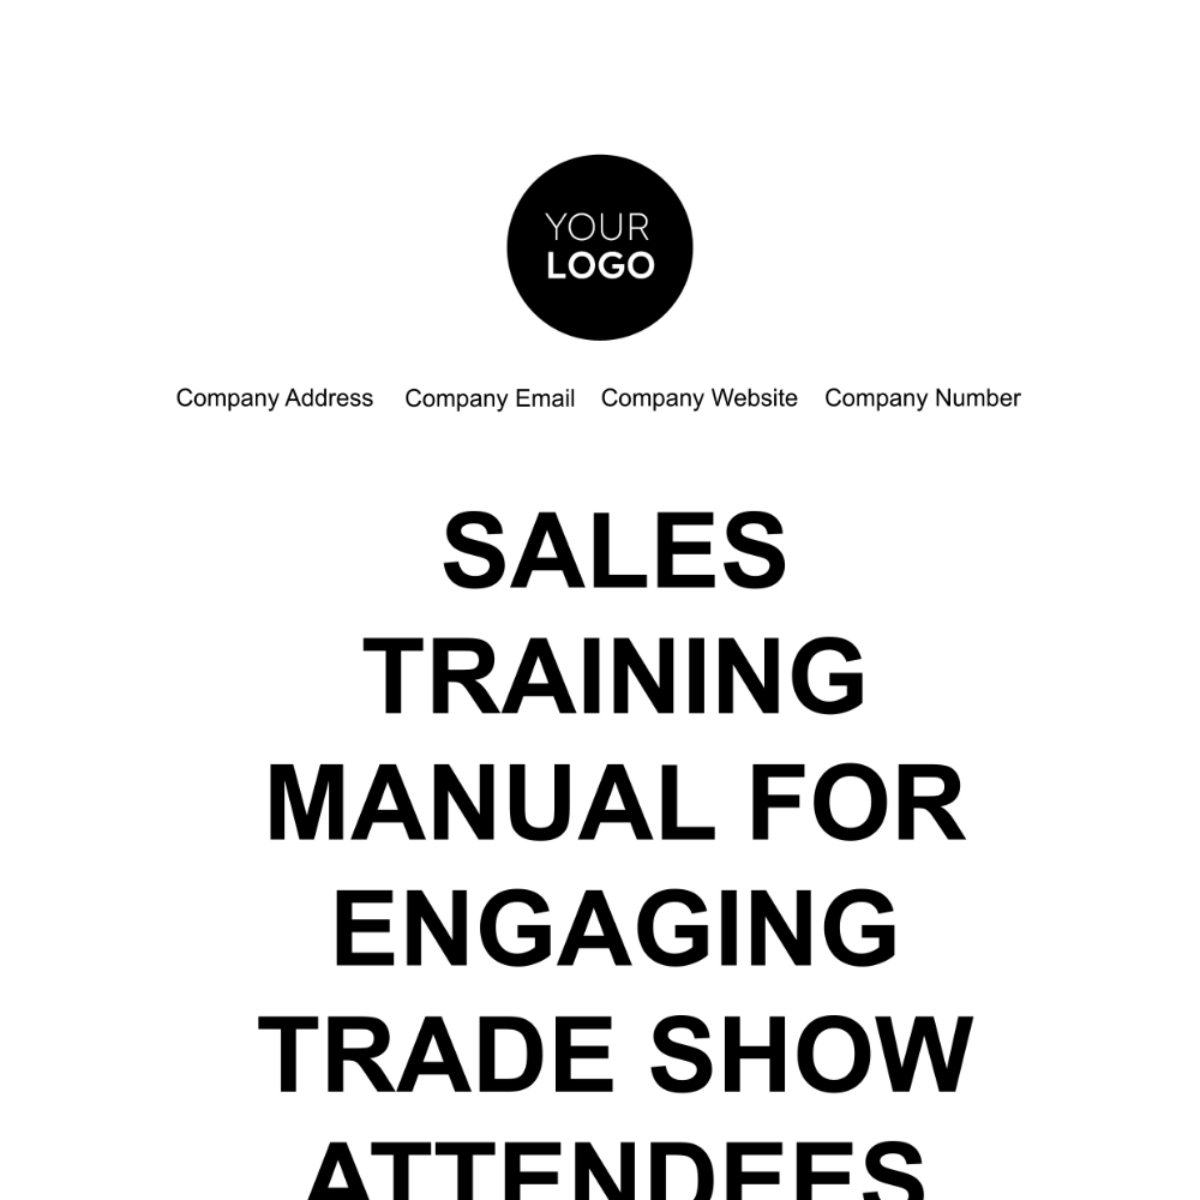 Free Sales Training Manual for Engaging Trade Show Attendees Template